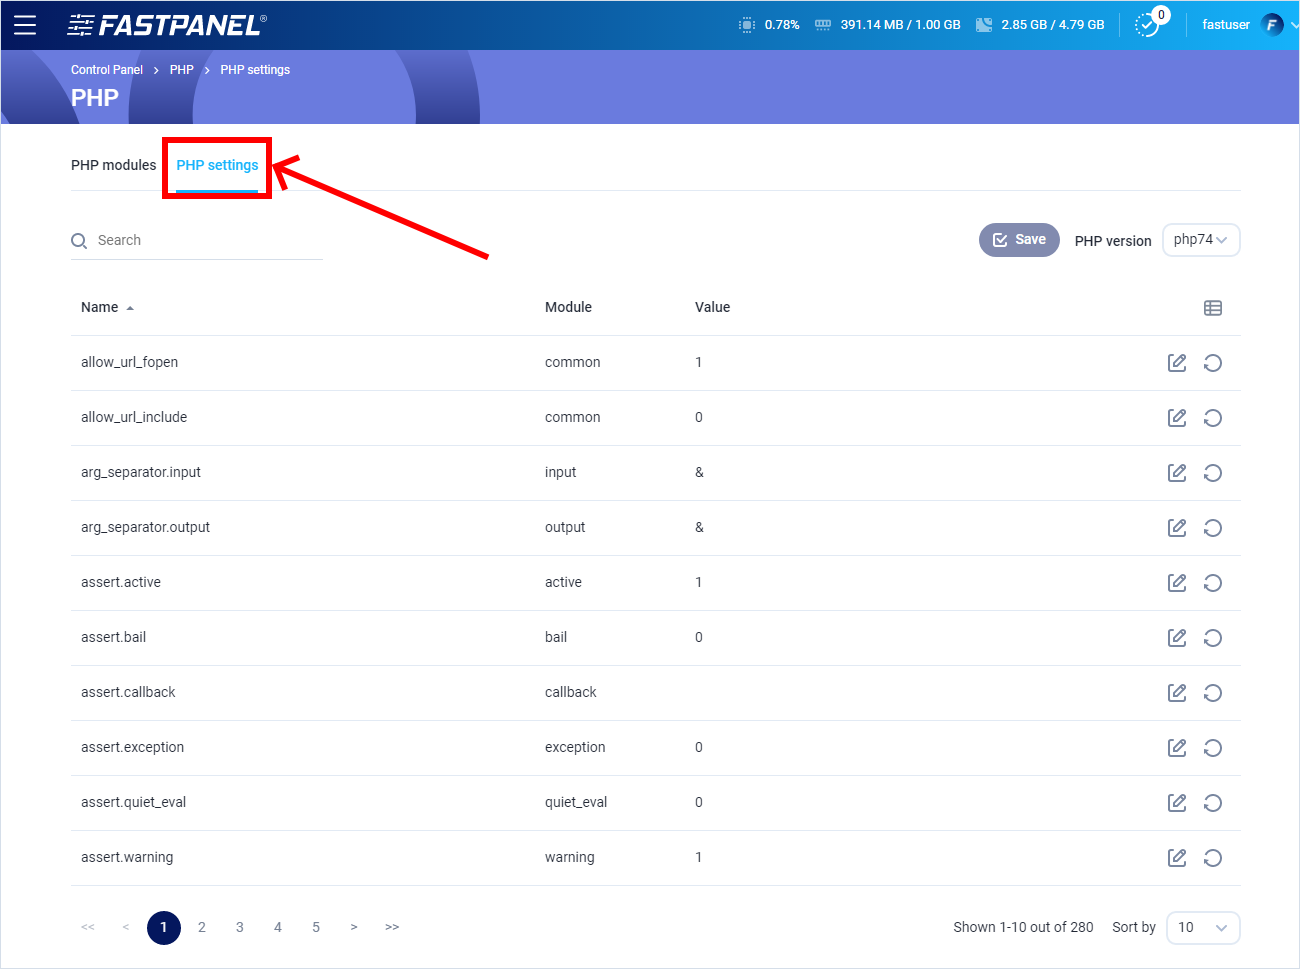 Global PHP settings in FASTPANEL